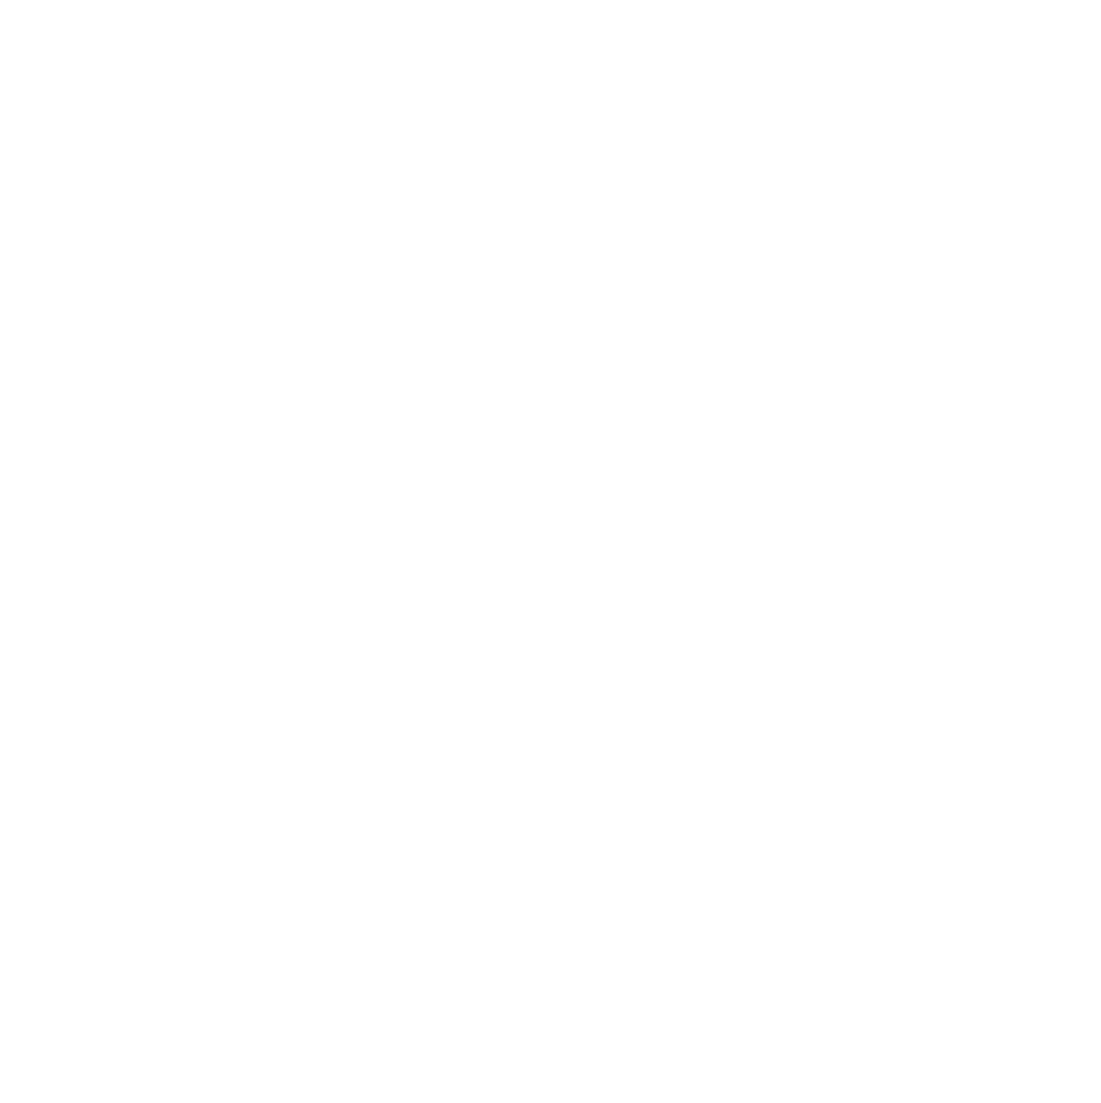 Happily Scooping